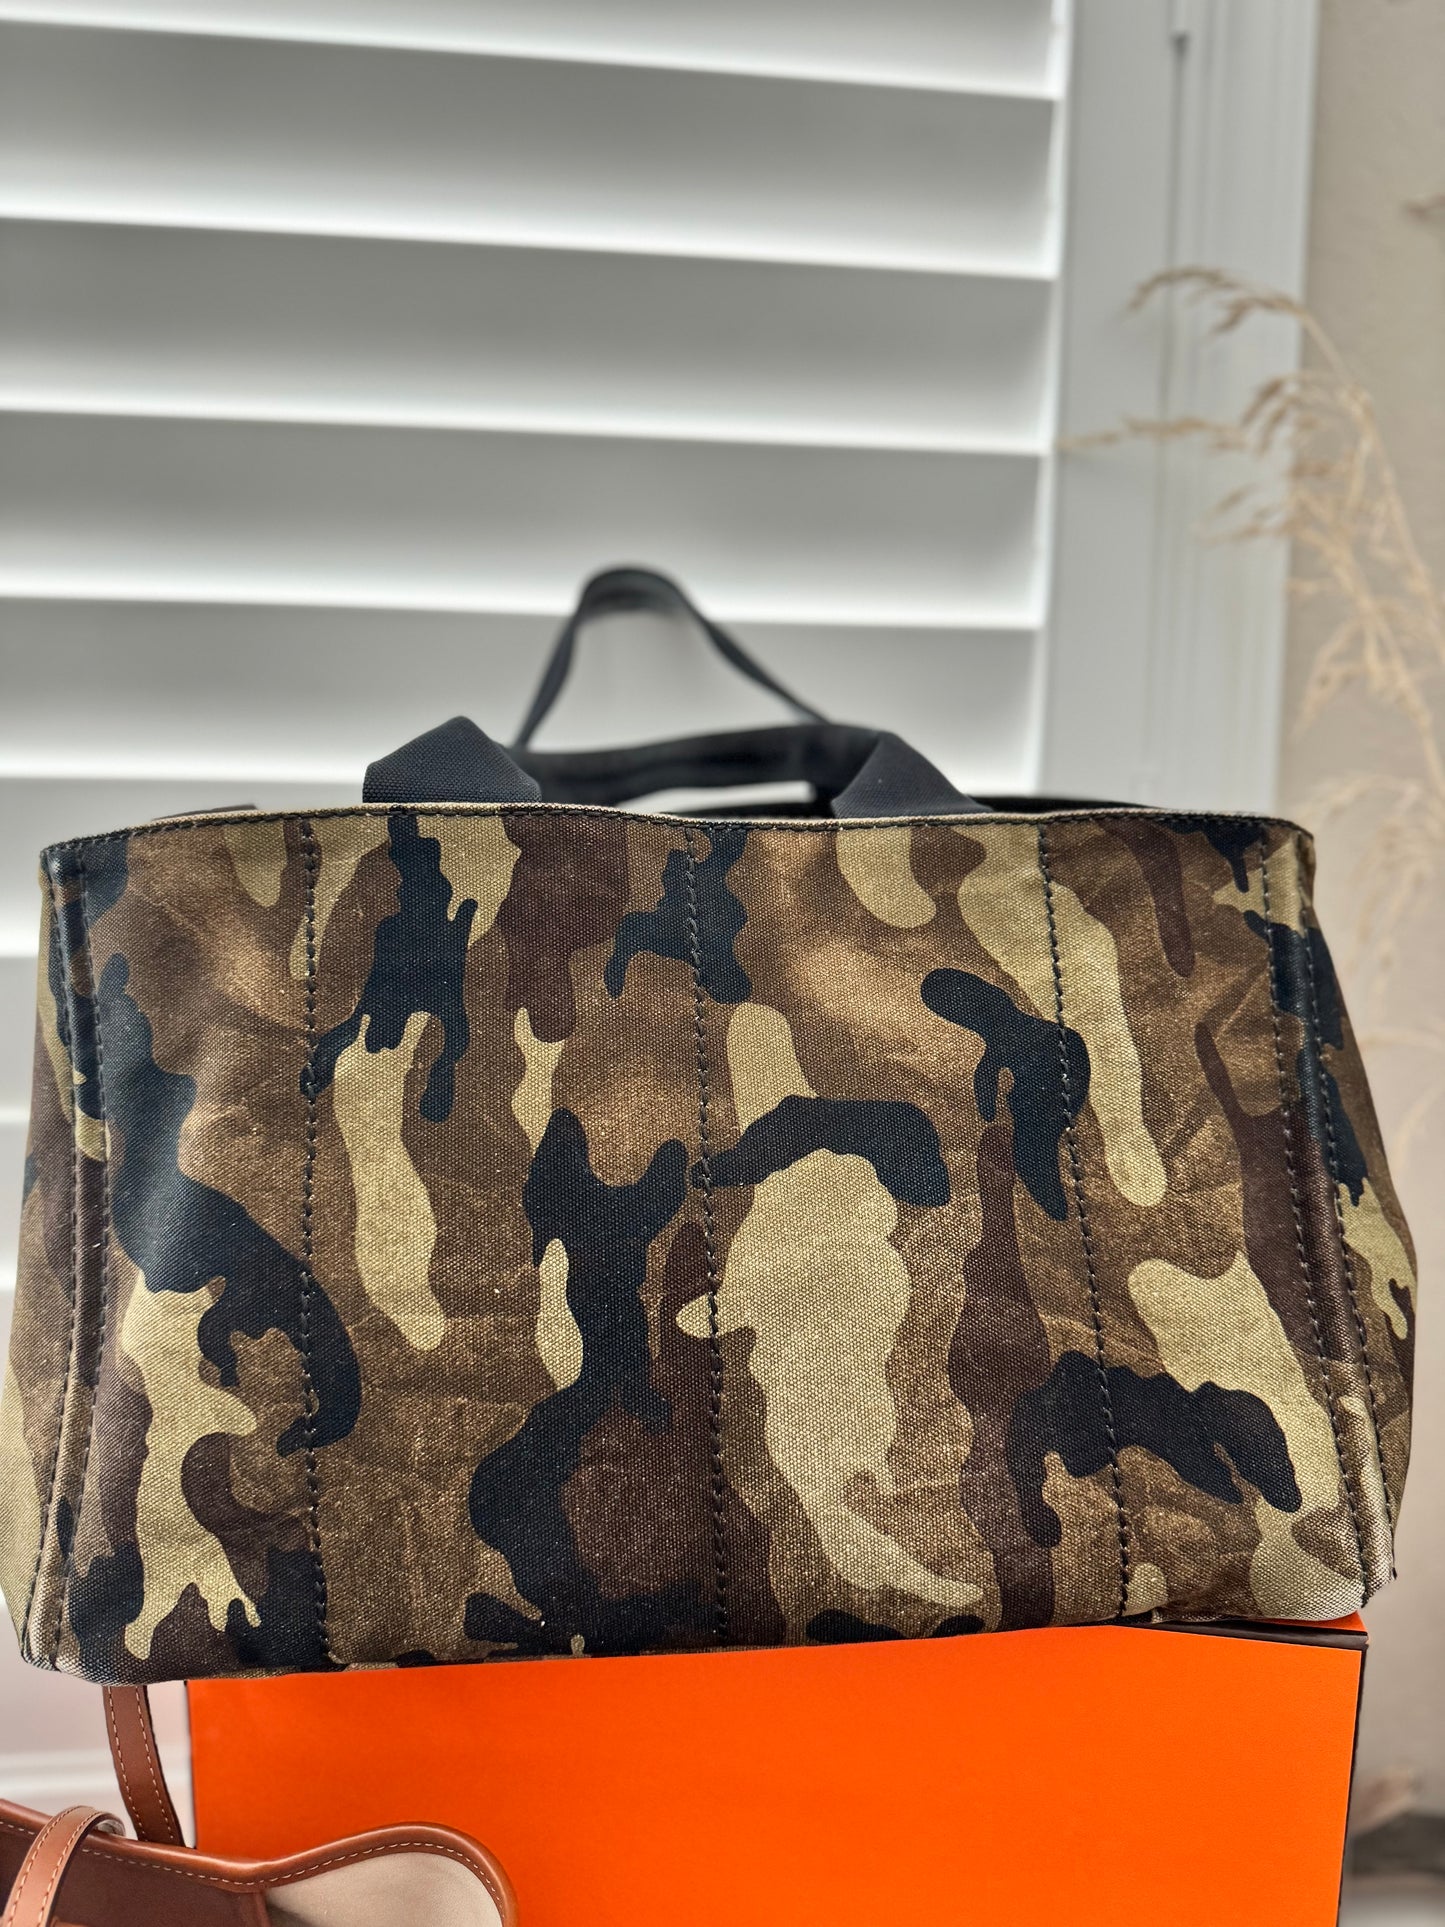 PRADA-Logo Camouflage Canapa Canvas Large Tote-Bag (Pre-Loved)